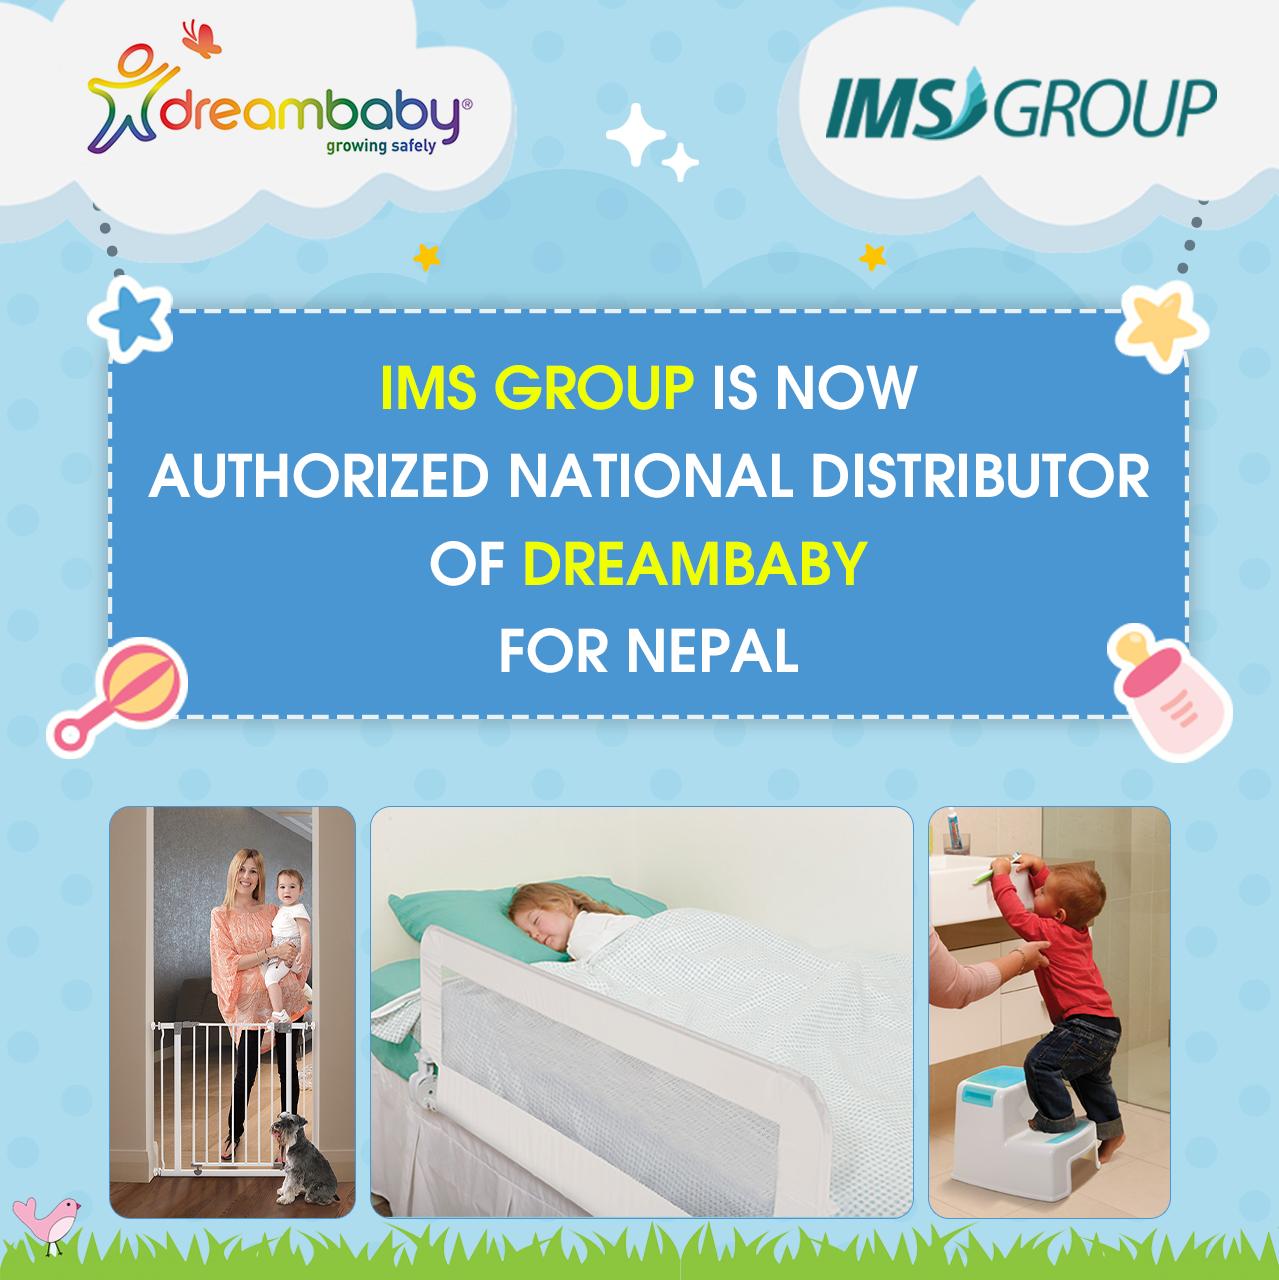 IMS Group acquires national distributorship for Dreambaby in Nepal